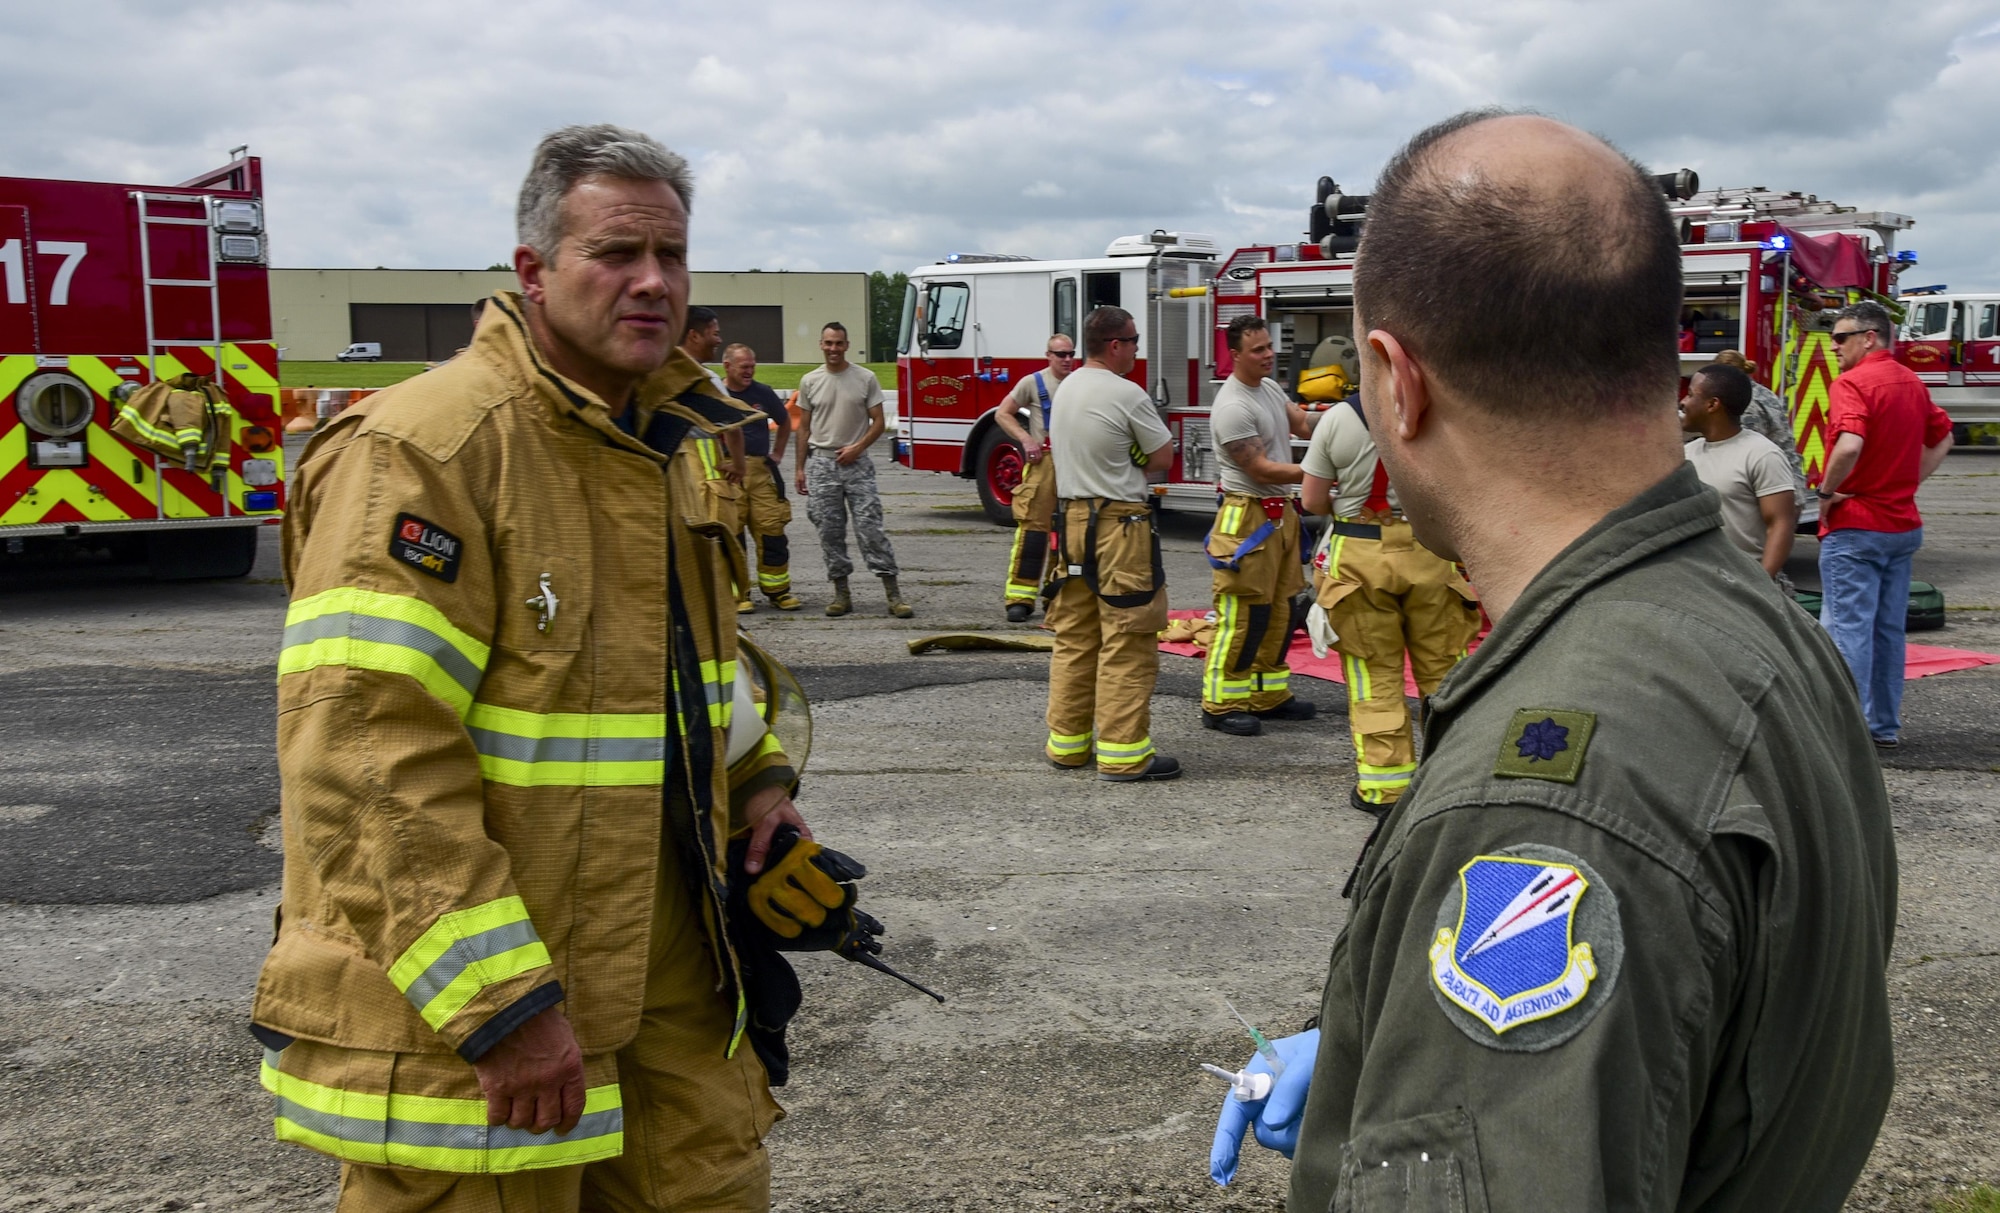 Trevor Daily, Royal Air Force assistant fire chief, debriefs with U.S. Air Force Lt. Col. Joseph Fugaro, 110th Bomb Squadron flight surgeon, after a medical exercise at RAF Fairford, U.K., June 13, 2017. Exercises like this increase interoperability between the two departments and prepare them to work together during real-life scenarios. (U.S. Air Force photo by Airman 1st Class Randahl J. Jenson)